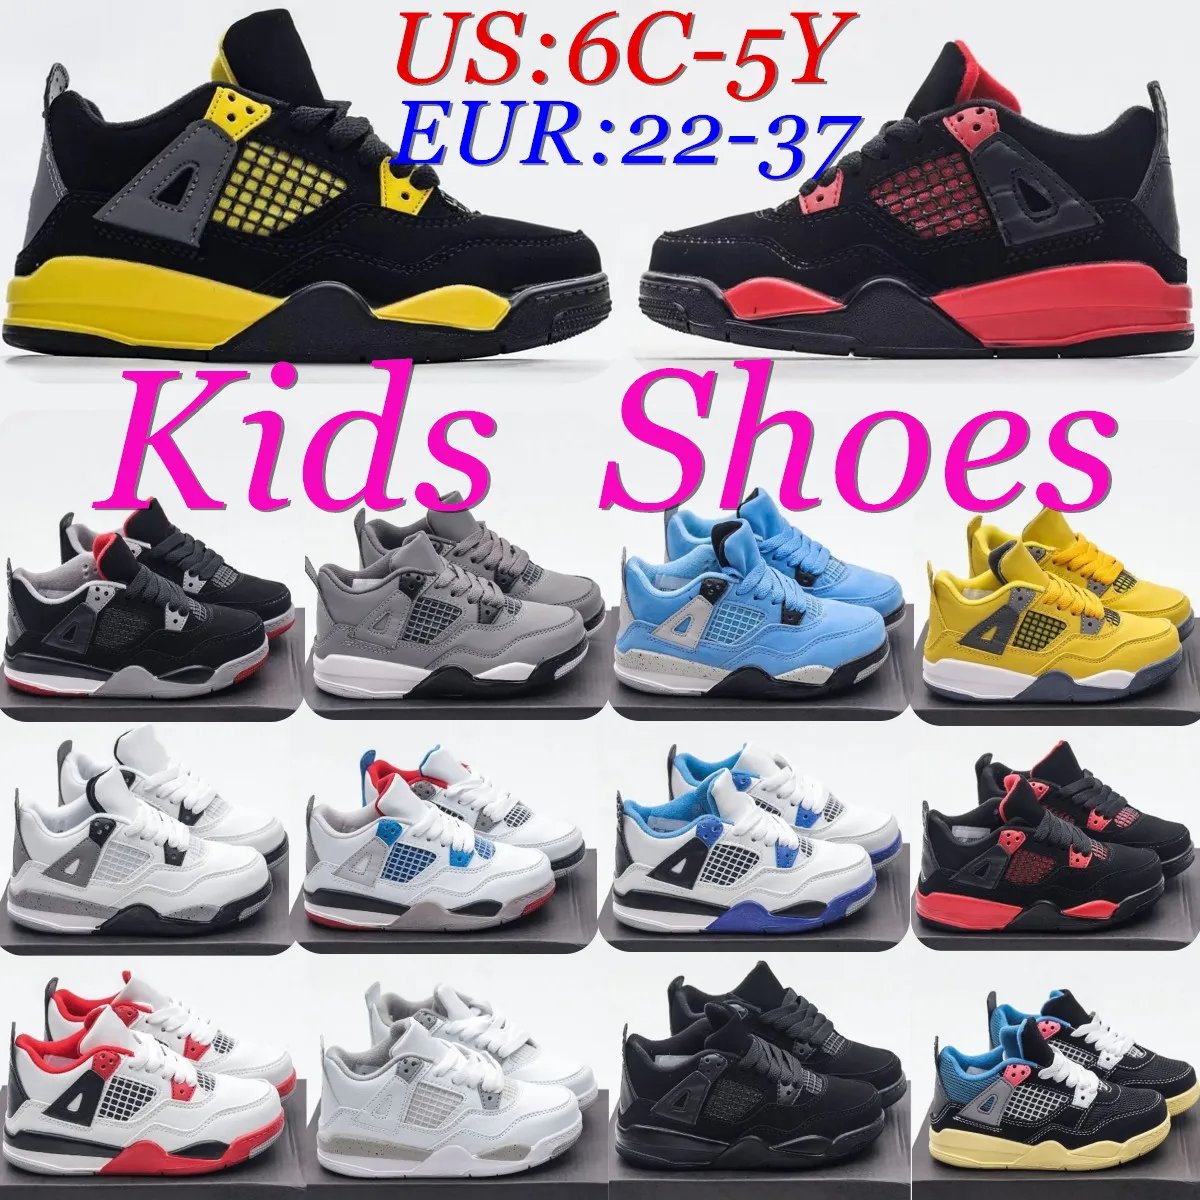 4S Kids Shoes 4 Basketball Shoe Black Cat Toddler Sneakers TD TD Cool Gray University Blue Bred Boys Girls Borking Enfants Athletic Outdoor With Box